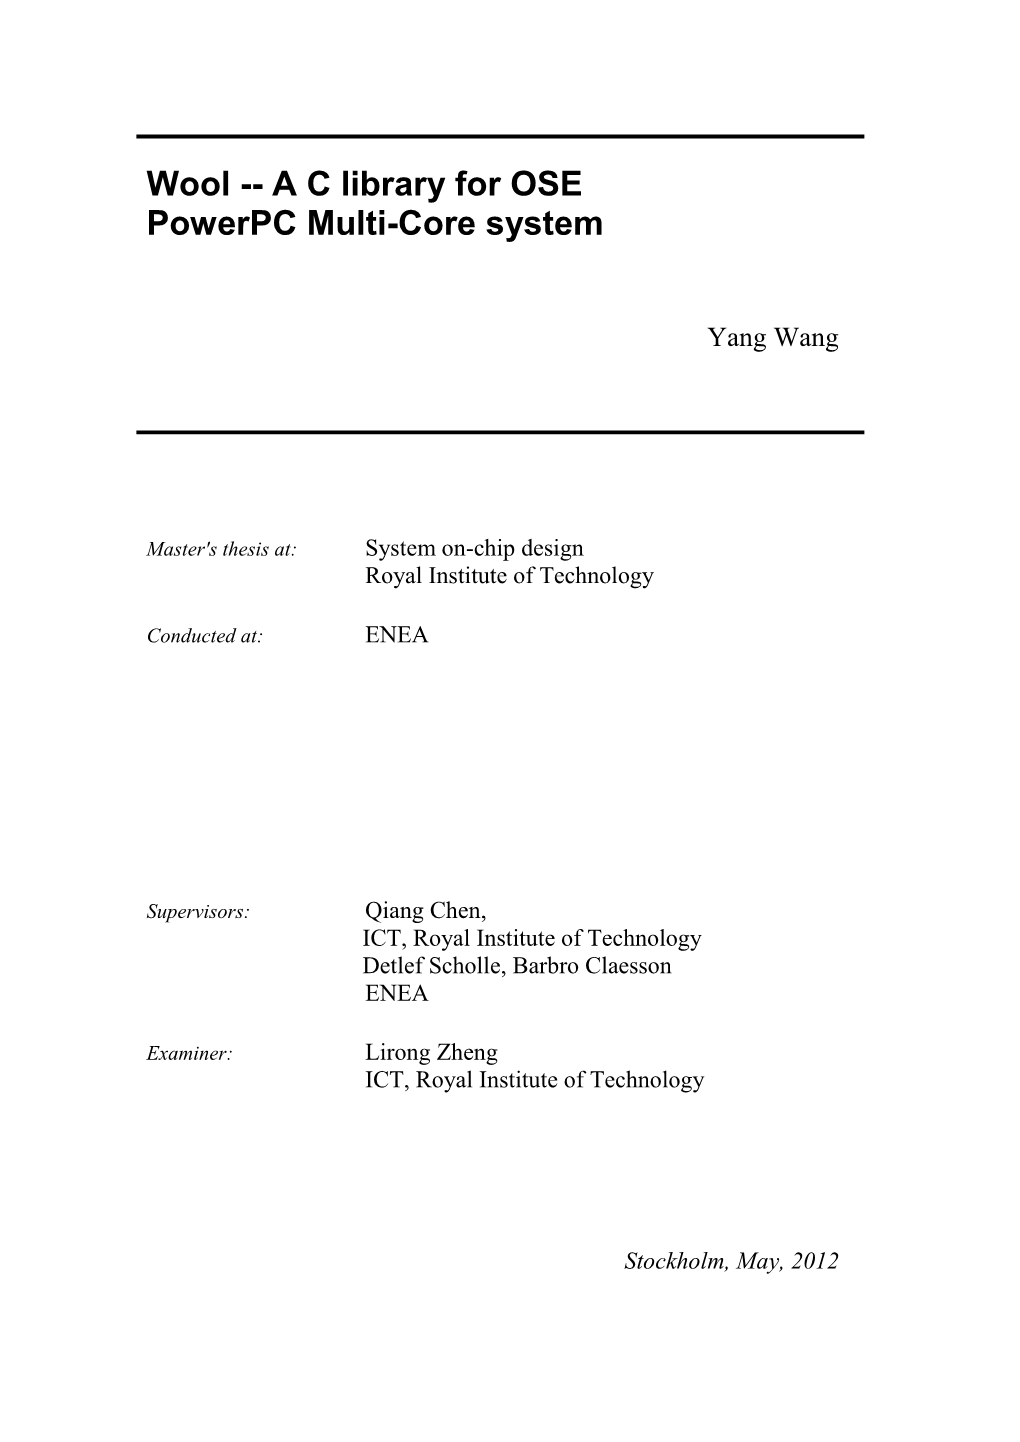 AC Library for OSE Powerpc Multi-Core System